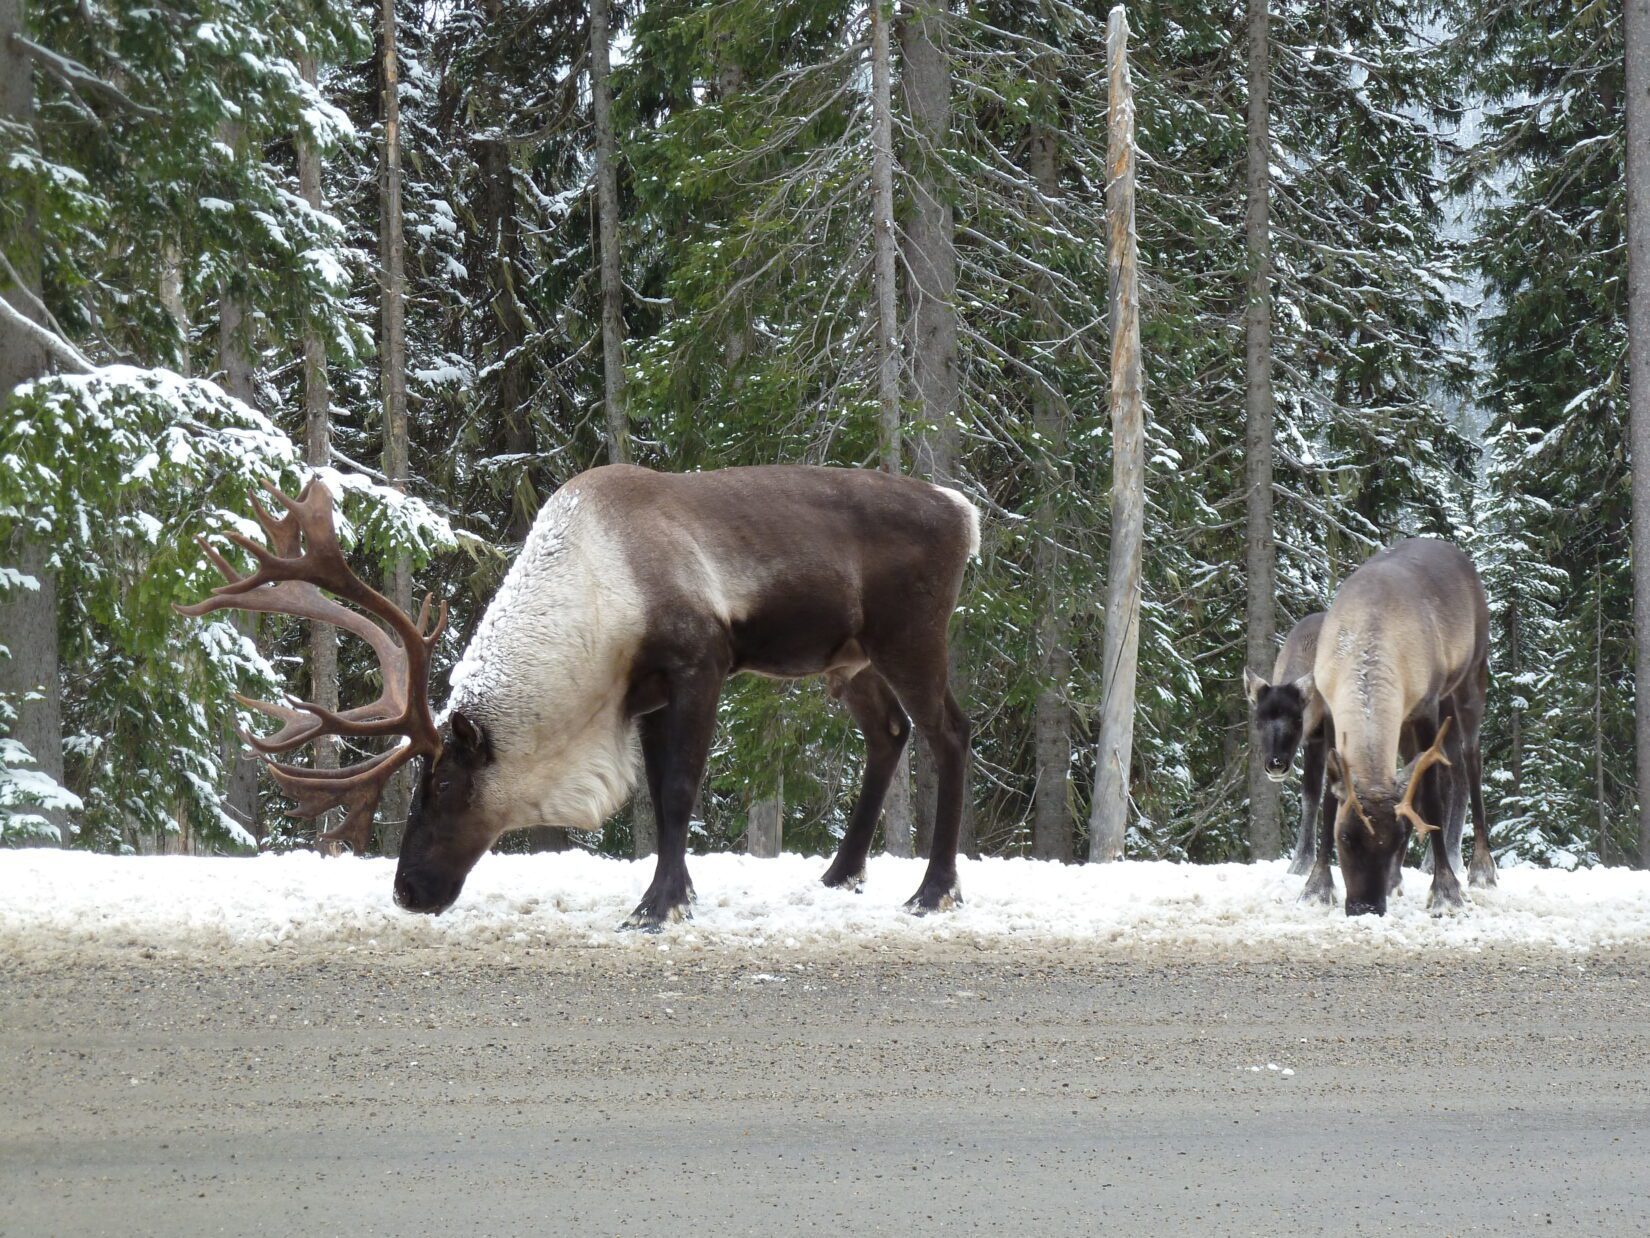 Caribou in snow by the side of the road